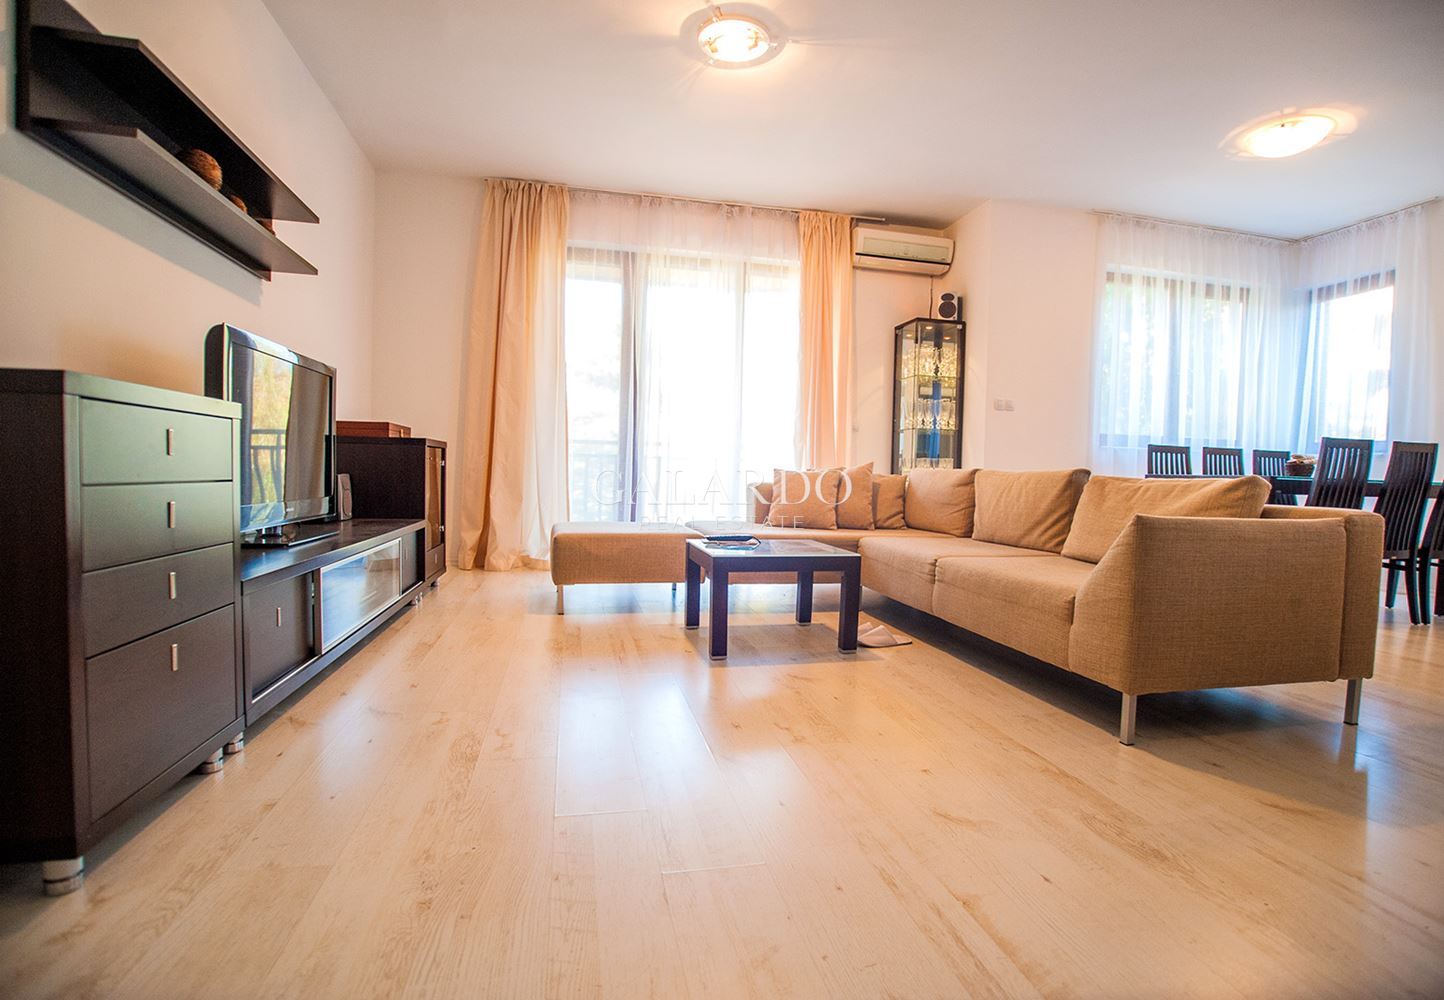 Furnished two-bedroom apartment in a gated complex "Maxi"